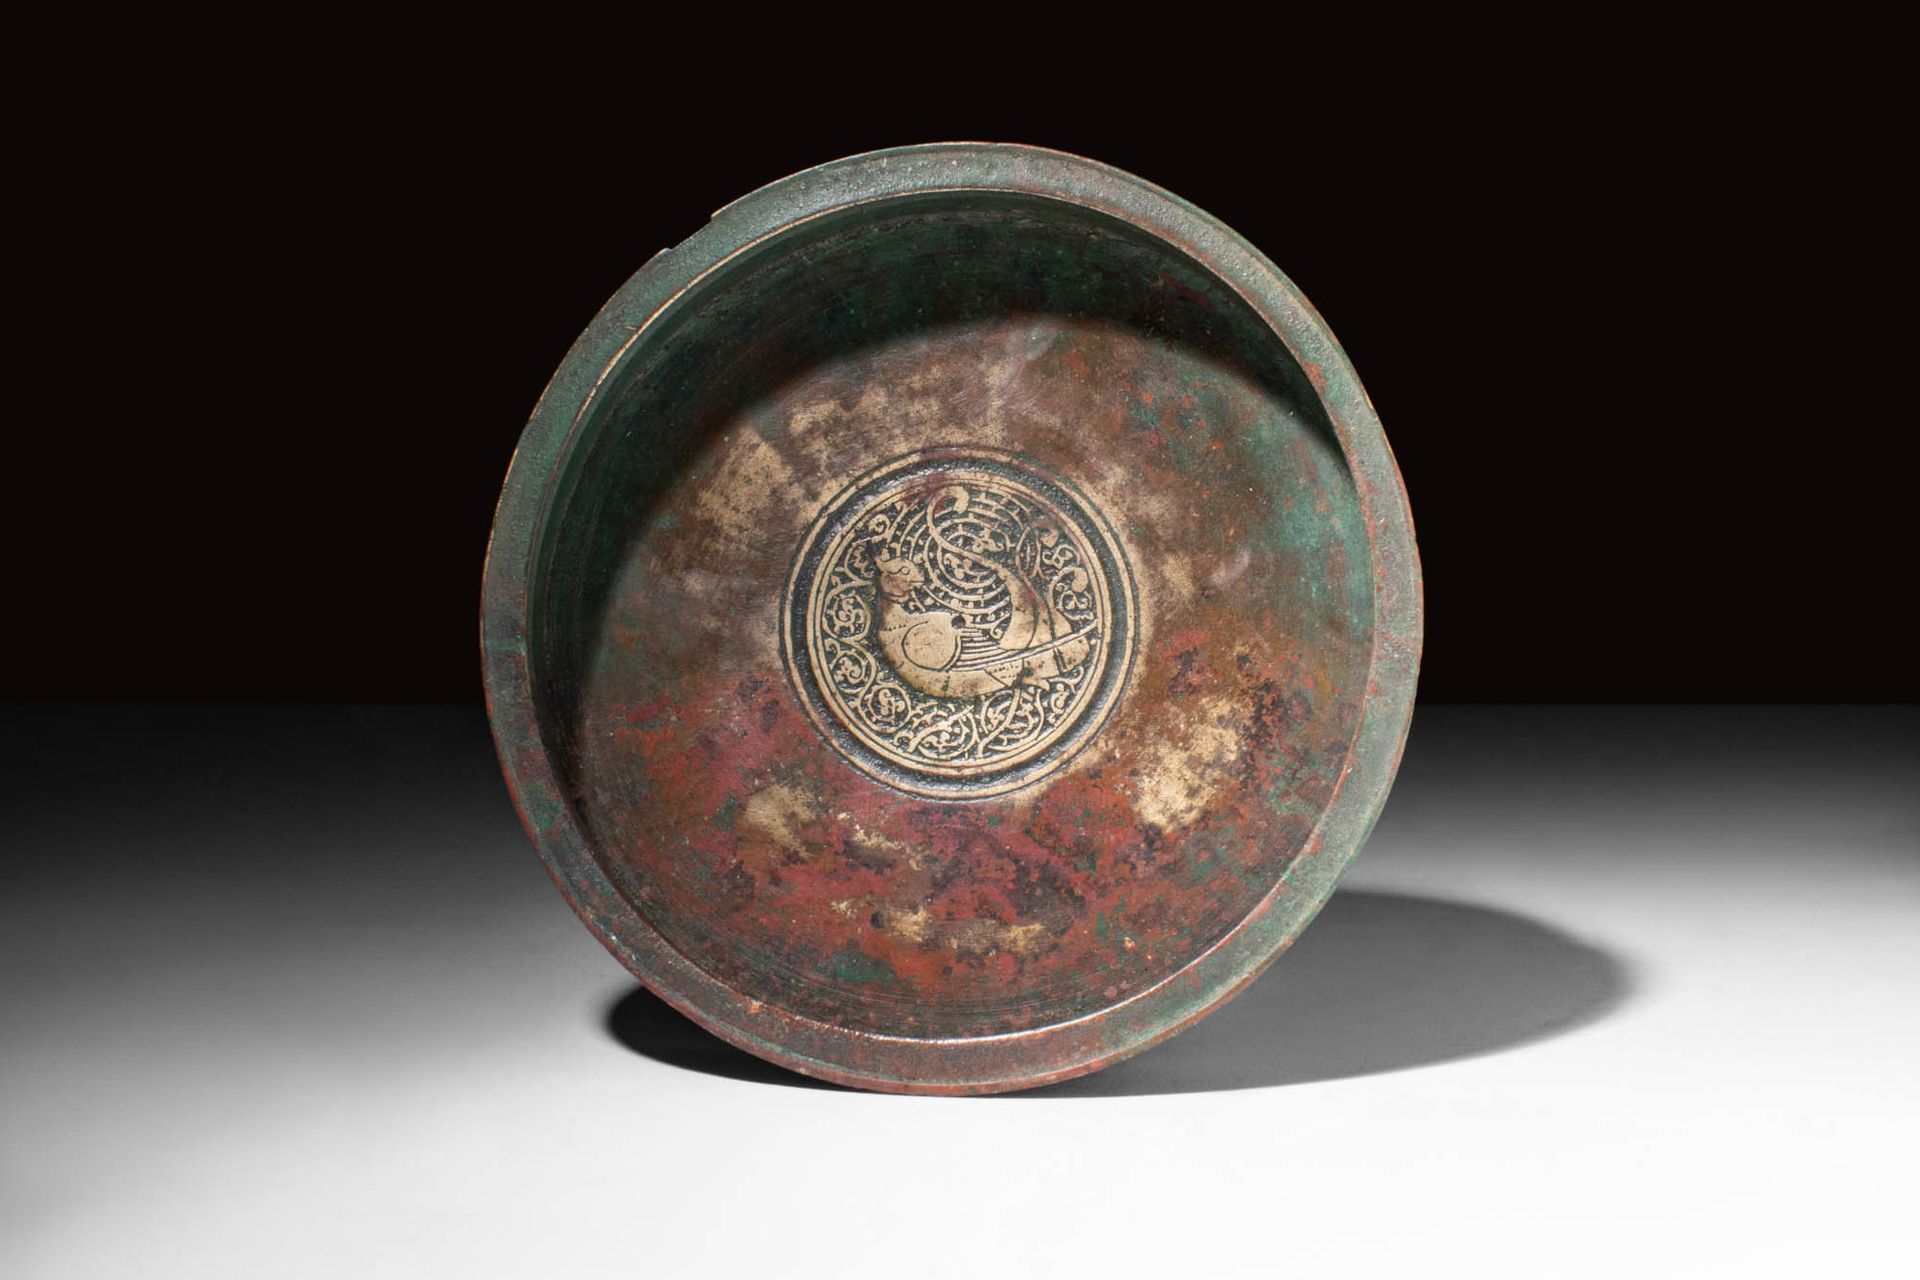 MEDIEVAL SELJUK COPPER ALLOY GILDED DECORATED TRAY Ca. AD 1100 - 1300.
Ein mitte&hellip;